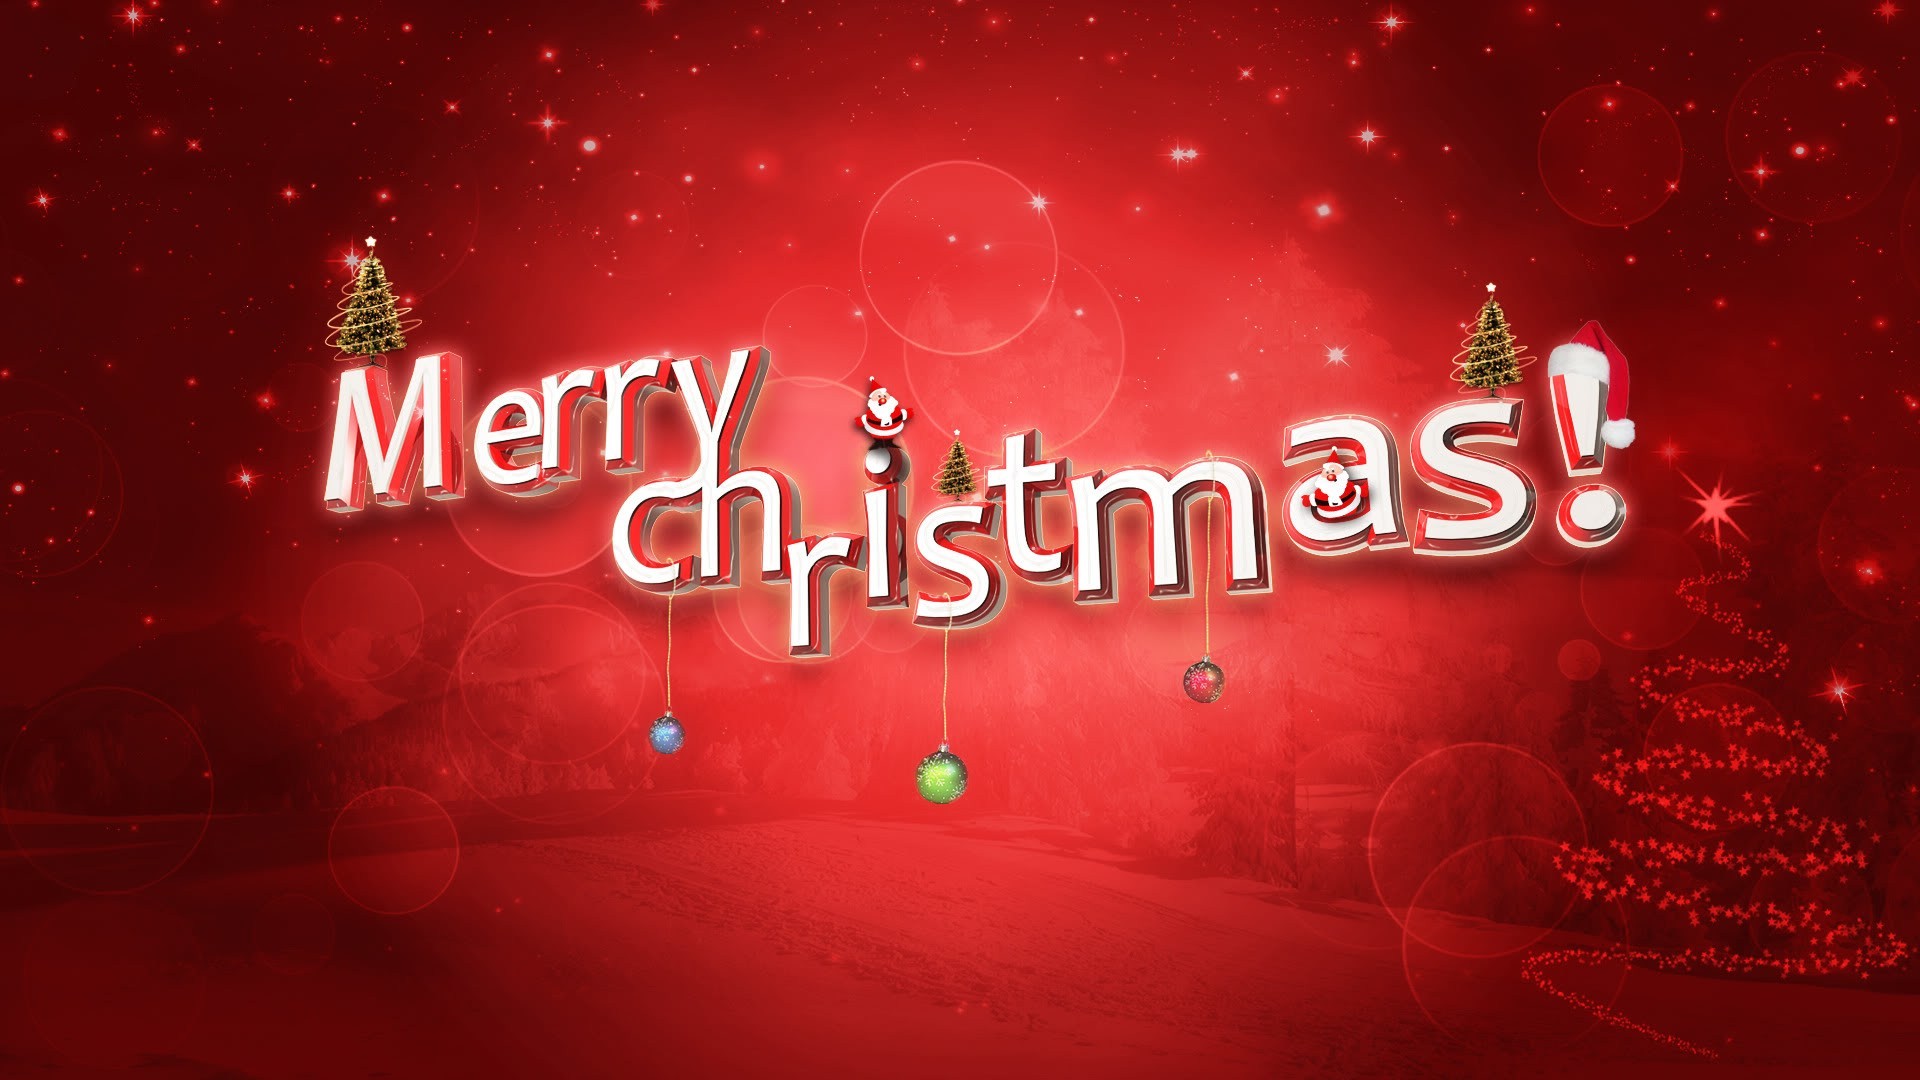 1920x1080 Best HD Merry Christmas 2016 Wallpapers For Your Desktop PC .